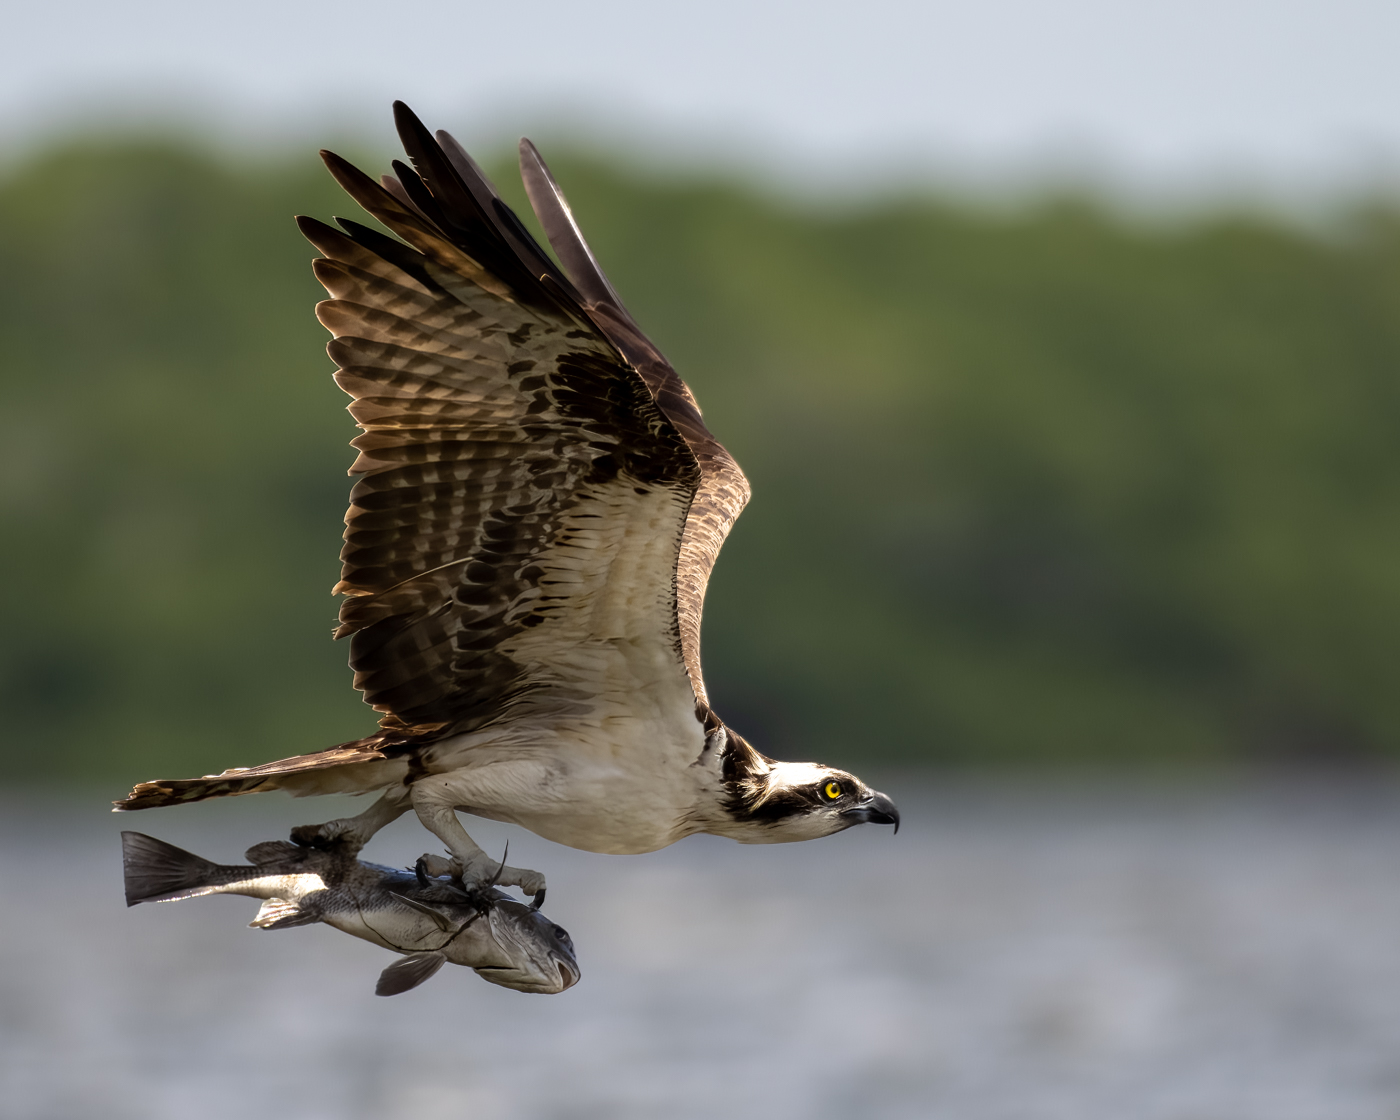 2nd Grand Award For Year End Nature In Class 2 By Mike Claudy For Osprey Catch With 25.5 Points in MAY-10-2023.jpg